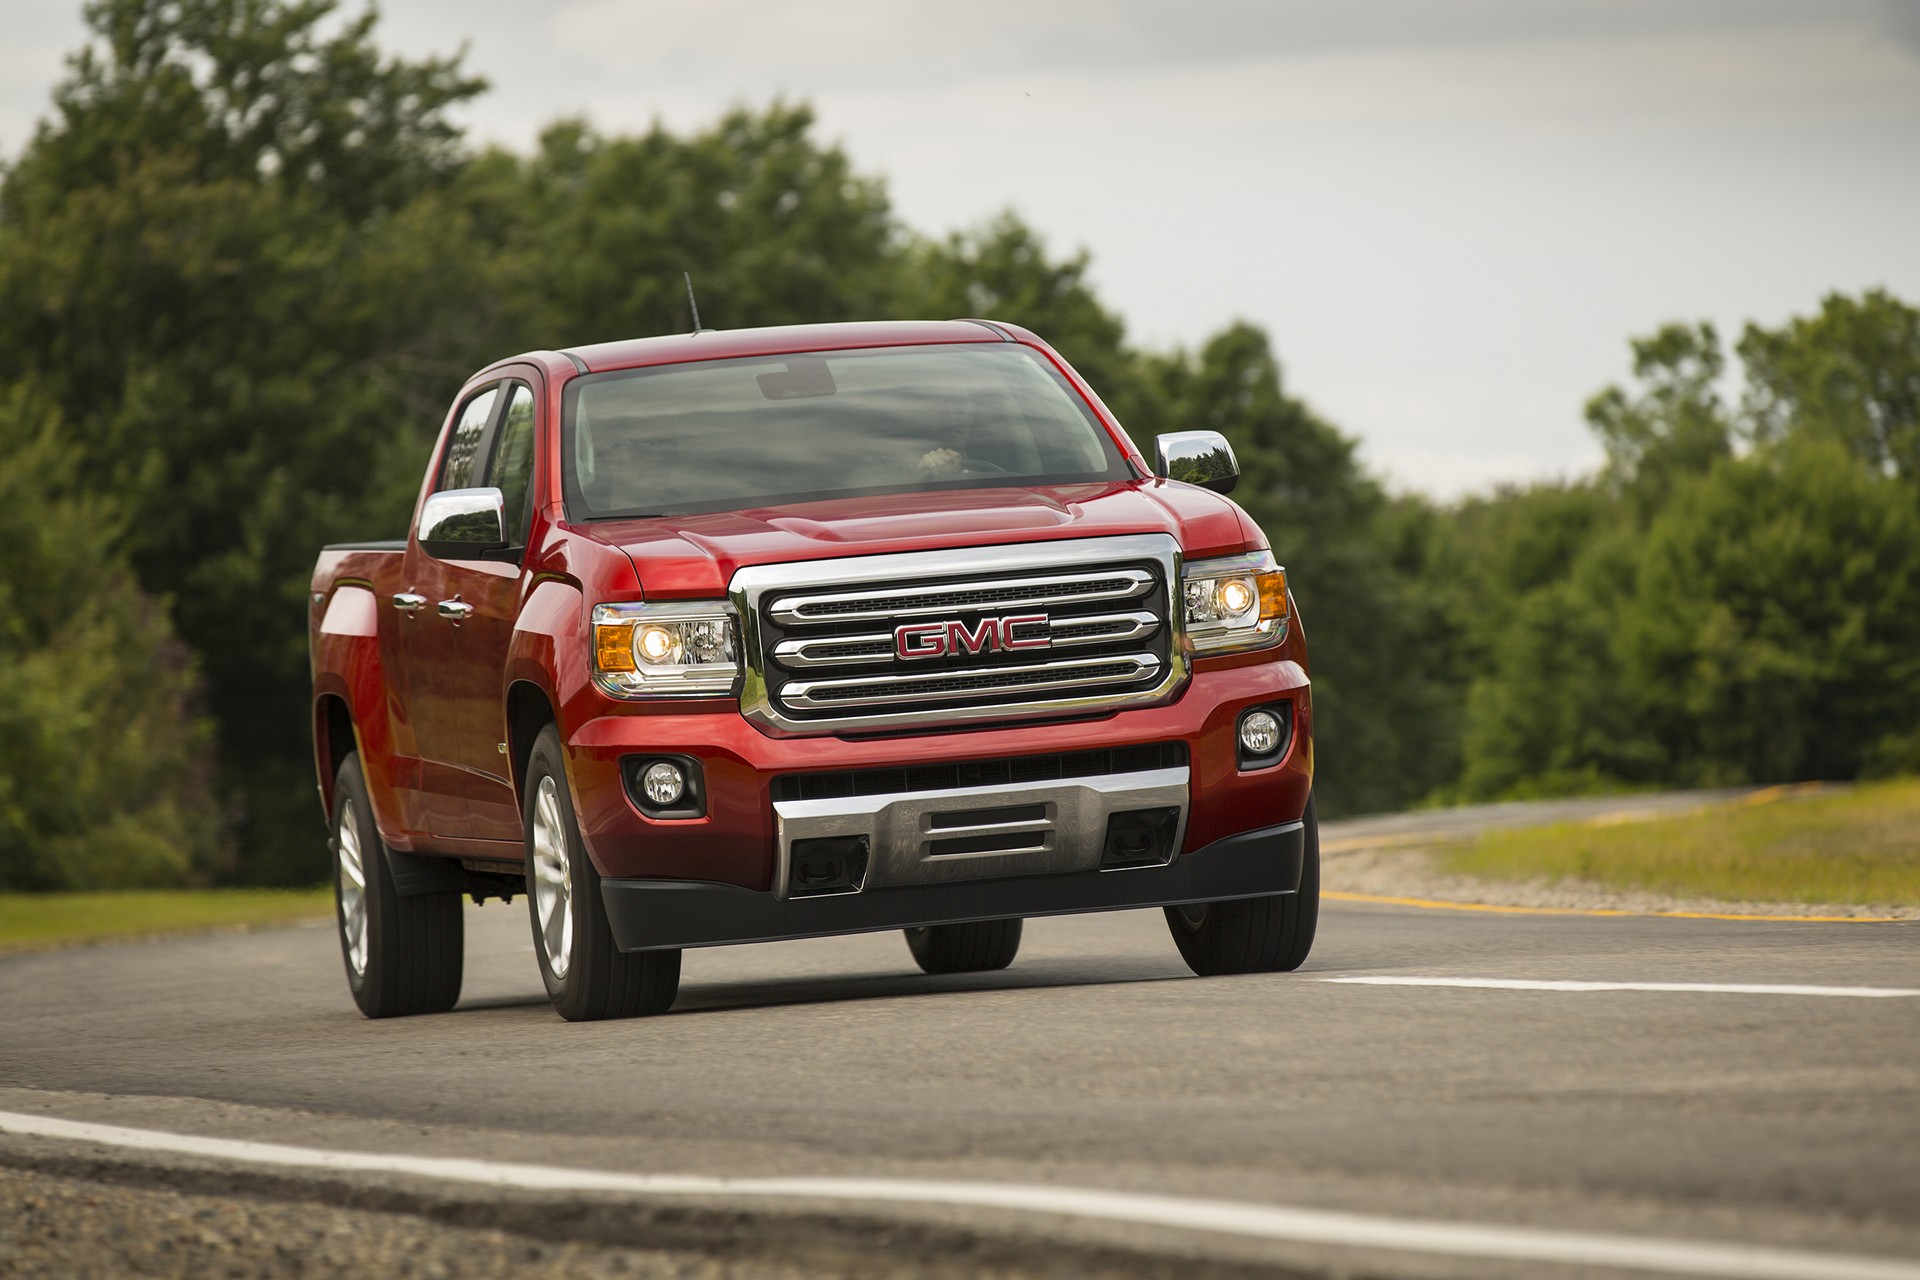 2016 GMC Canyon SLT Crew Cab with Chrome Accents © General Motors